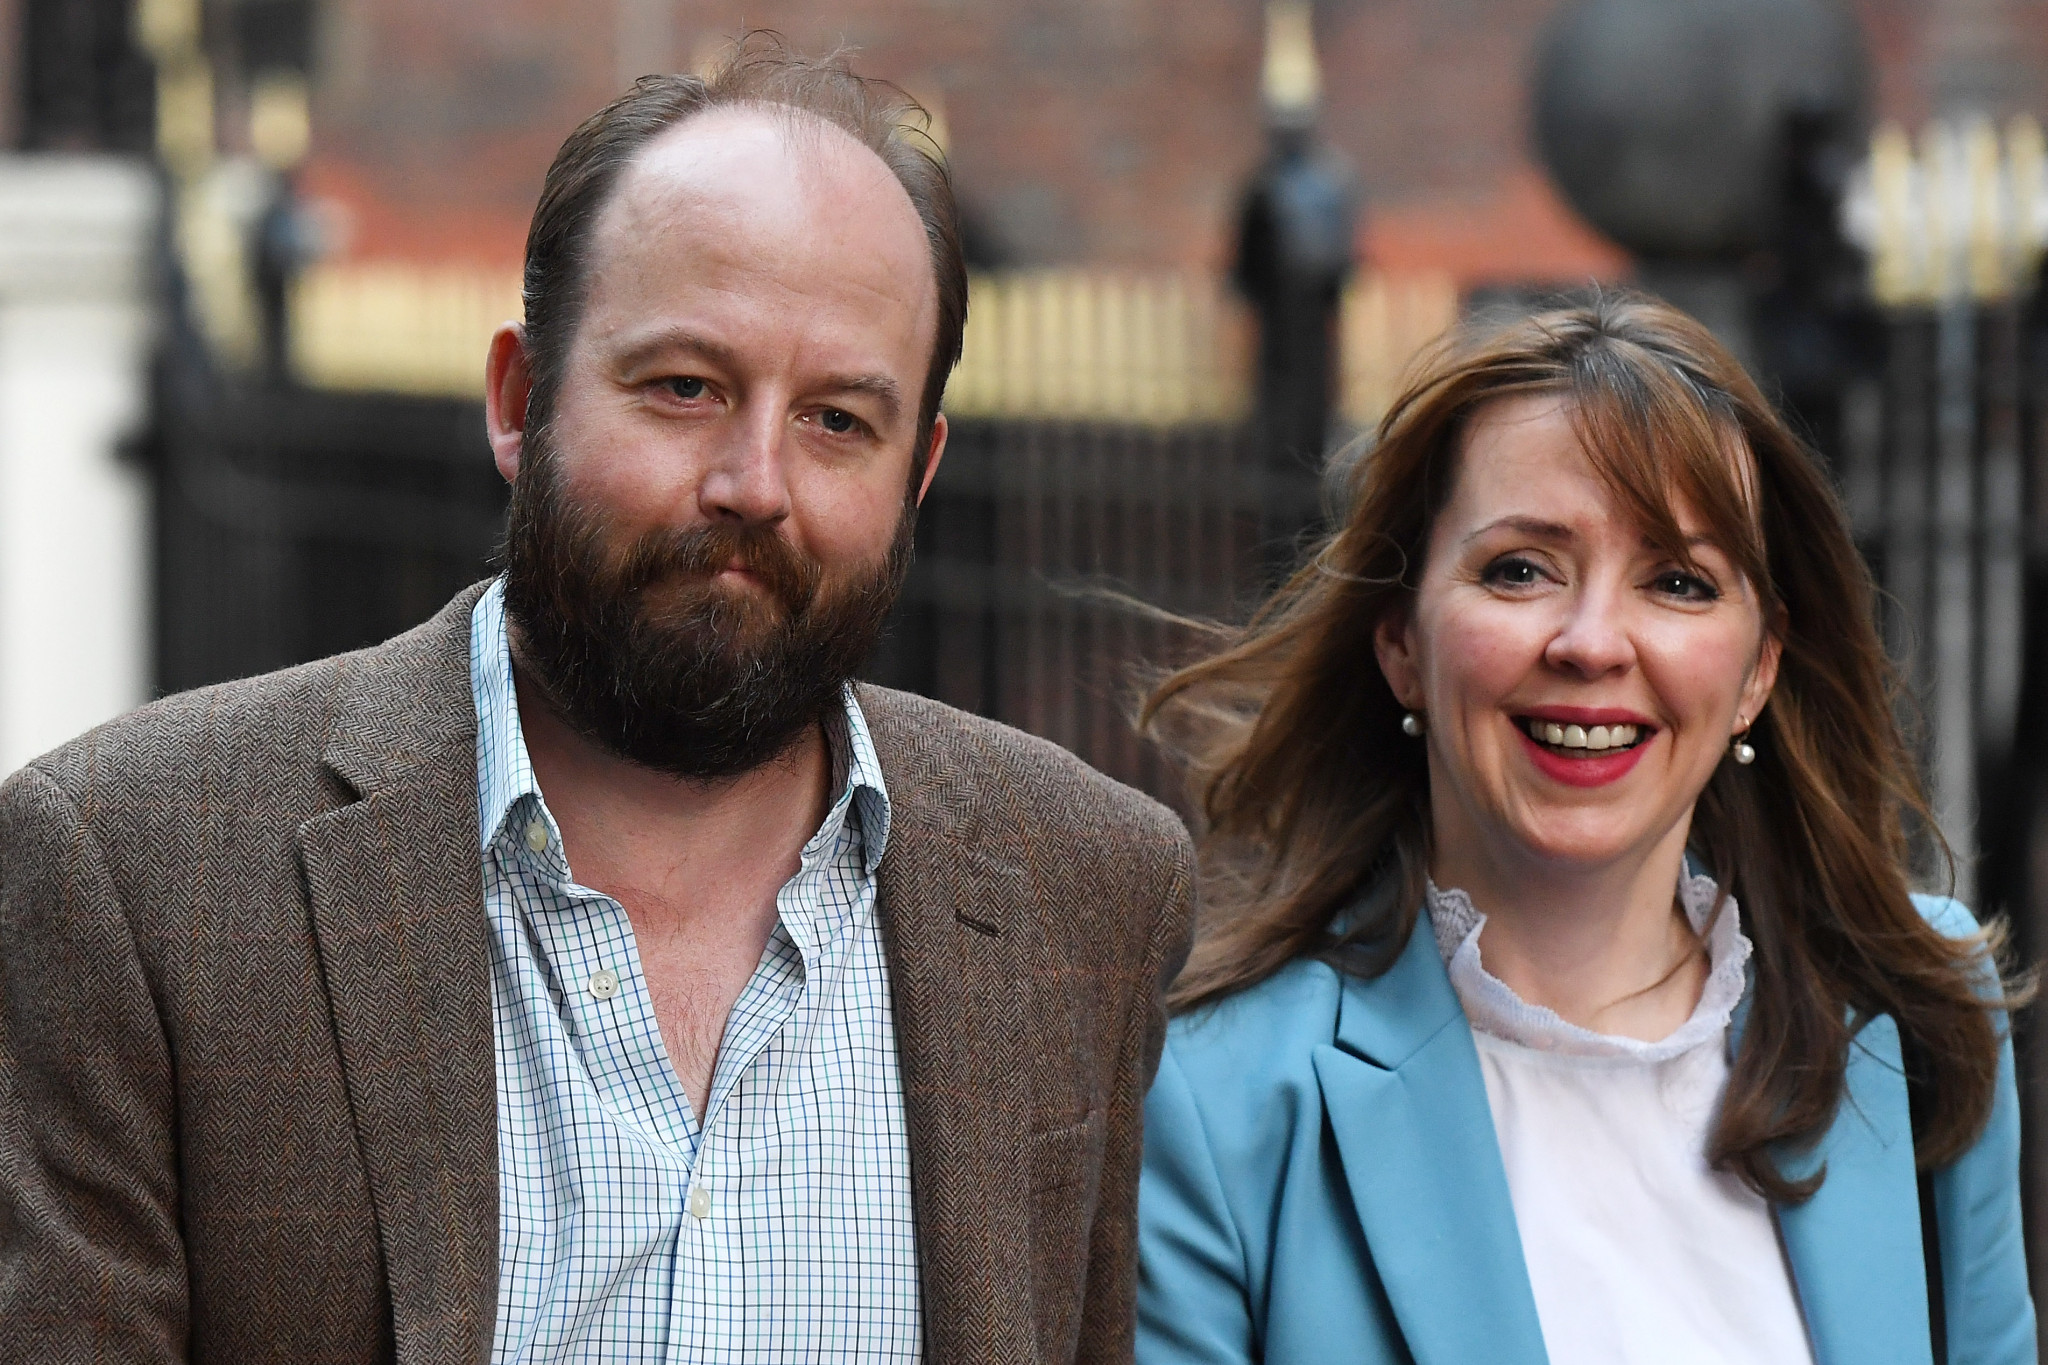 Nick Timothy, Prime Minister Theresa May’s former joint chief of staff, has been appointed to the Birmingham 2022 board ©Getty Images